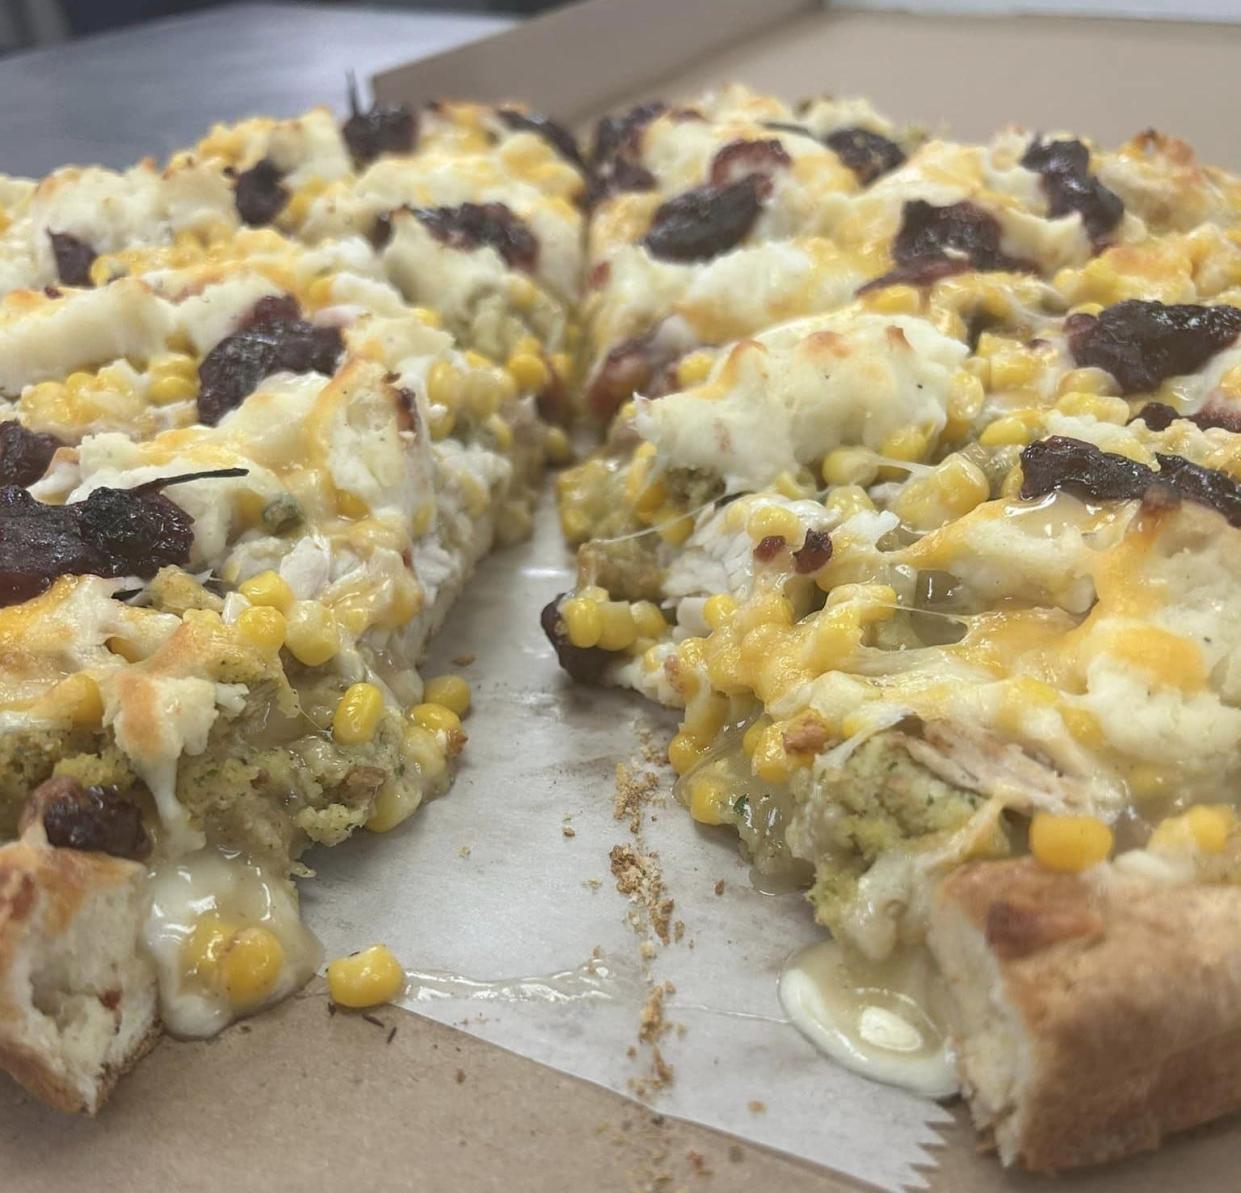 Thanksgiving Pizza is available Nov. 2023 at Jay's Incredible Pizza at 3600 College Road in Wilmington, N.C.